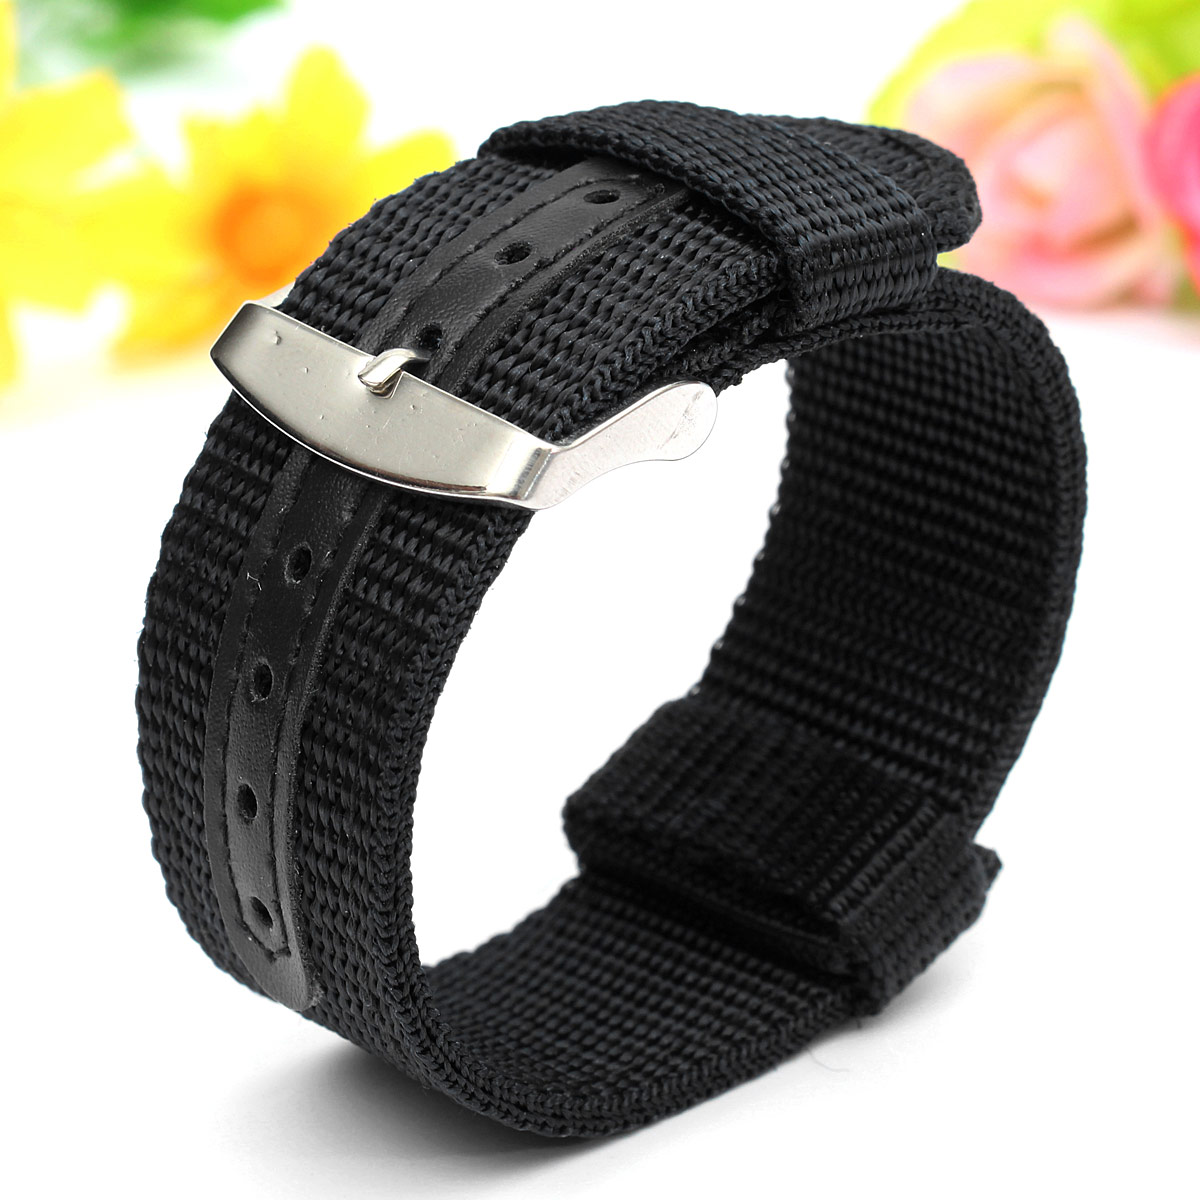 18202224mm-Waterproof-Watch-Band-Mens-Army-Military-Nylon-Canvas-Wrist-Bracelet-Strap-Replacement-1592085-6